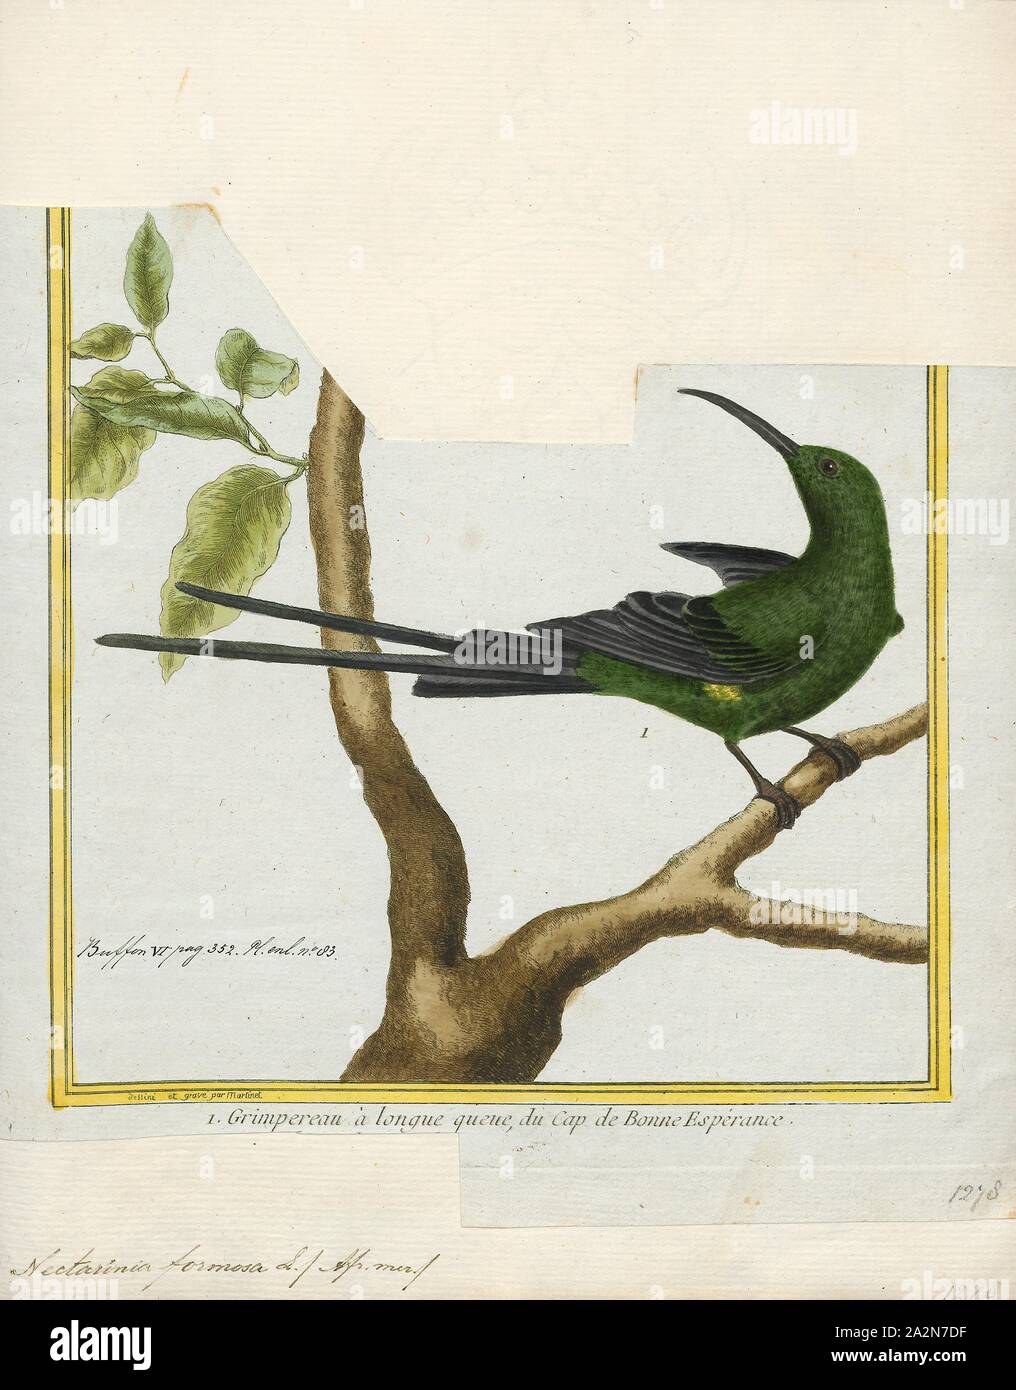 Nectarinia famosa, Print, The malachite sunbird (Nectarinia famosa) is a small nectarivorous bird found from the highlands of Ethiopia southwards to South Africa. They pollinate many flowering plants, particularly those with long corolla tubes, in the Fynbos., 1700-1880 Stock Photo